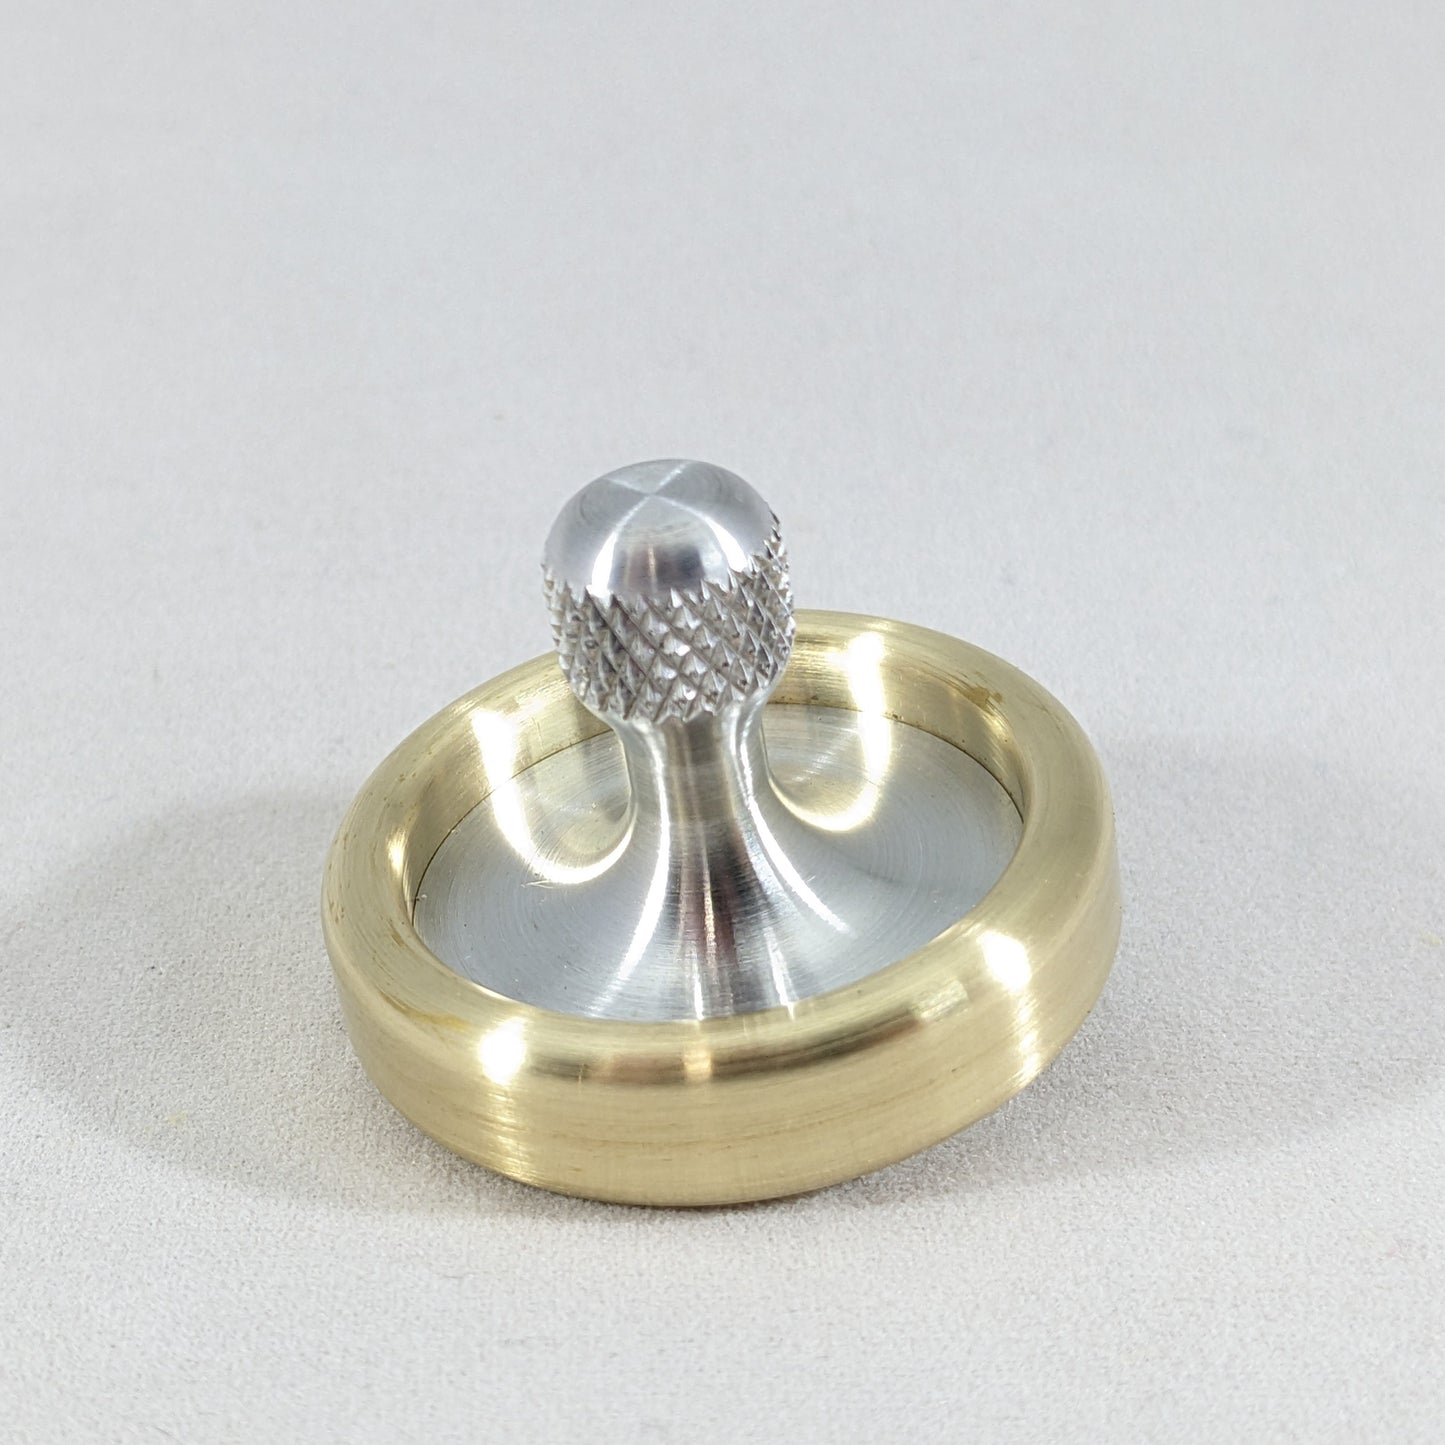 Dynamo - Brass and Aluminum Spinning Top w/ Knurled Spindle